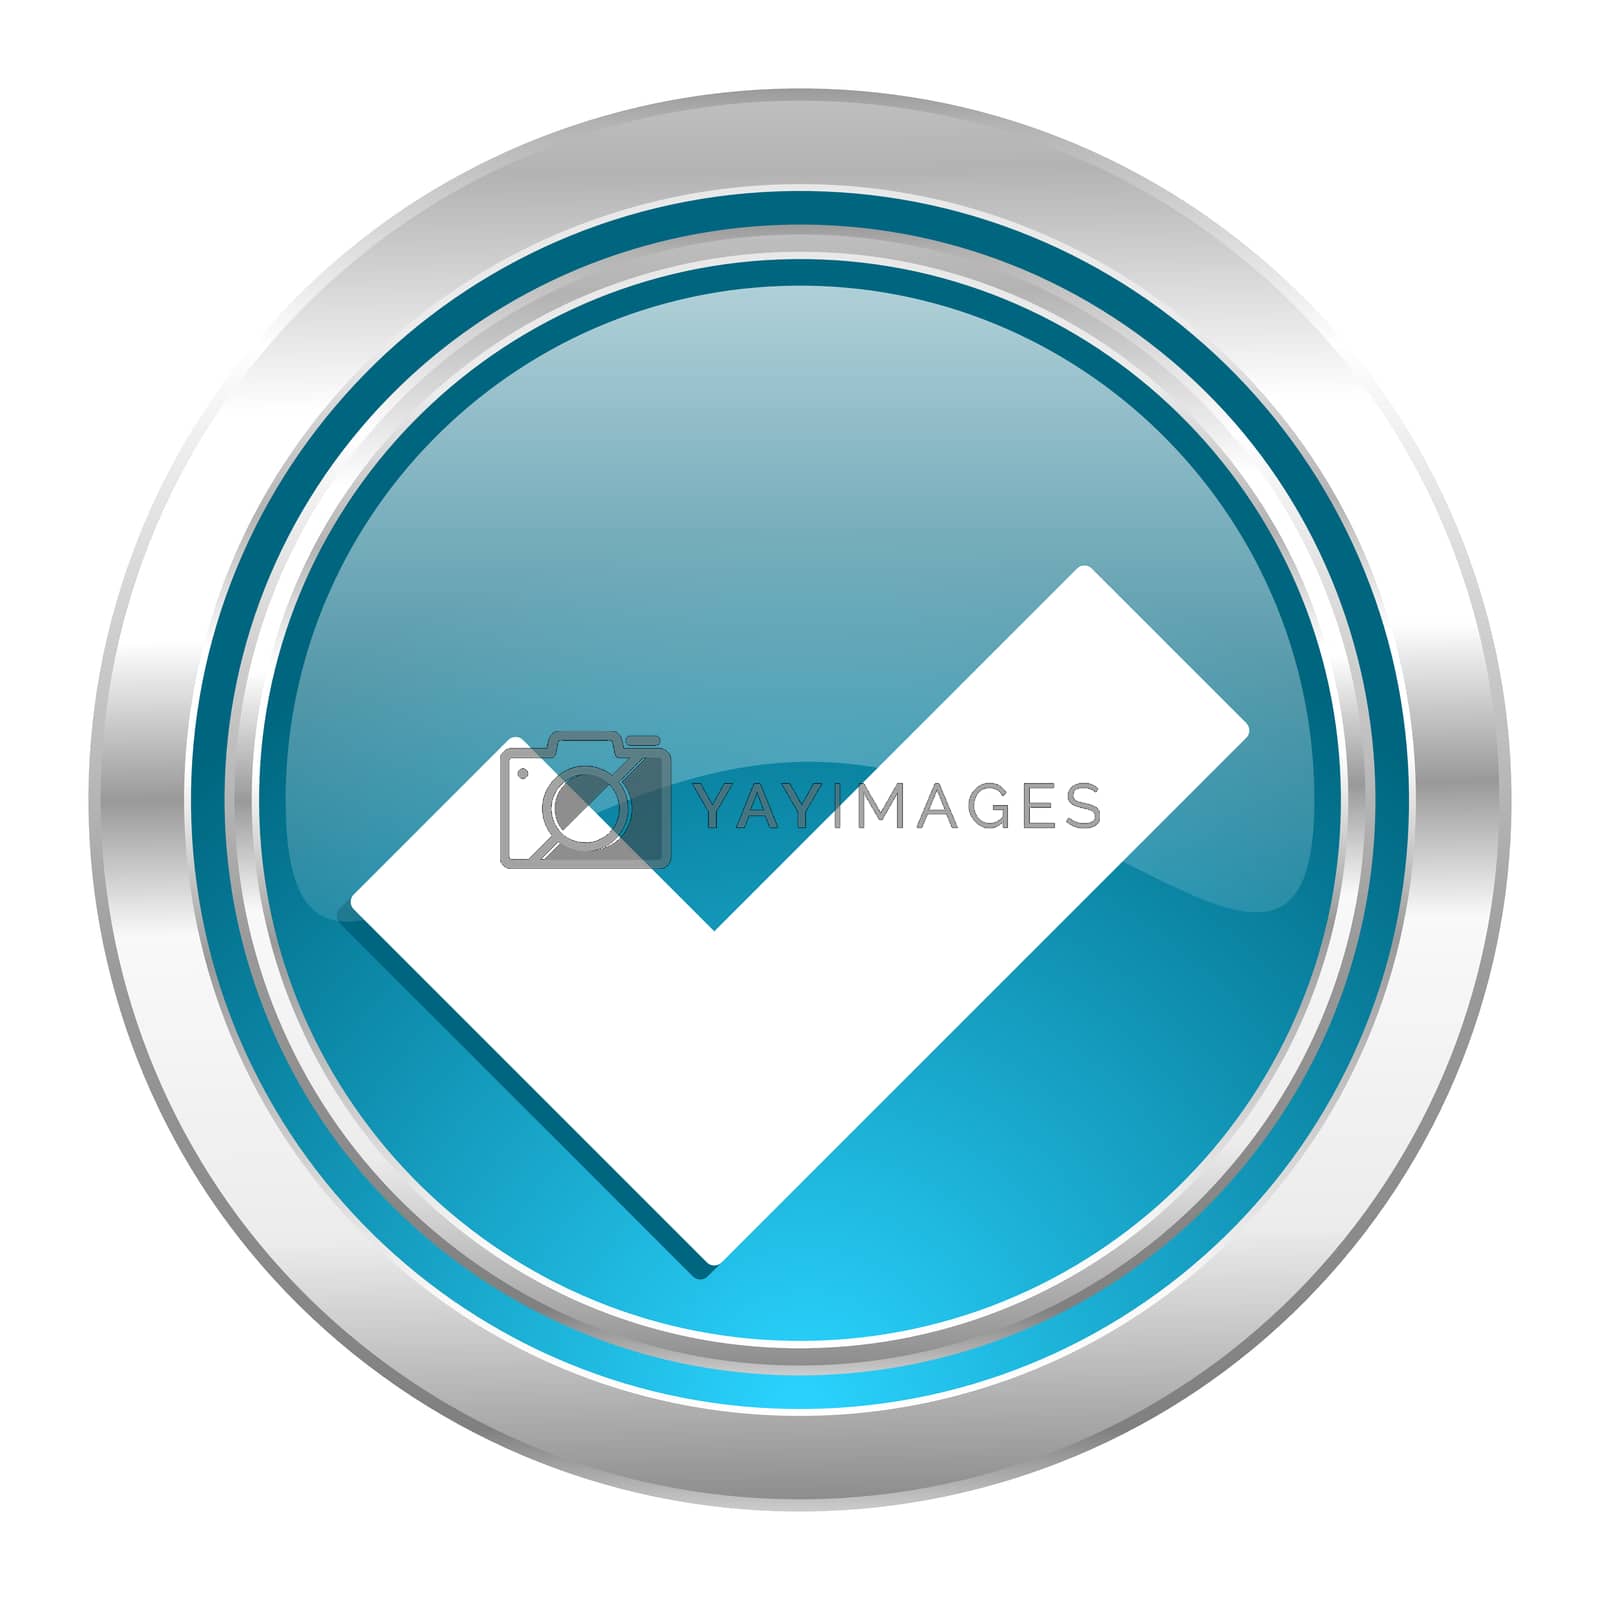 Royalty free image of accept icon, check sign by alexwhite